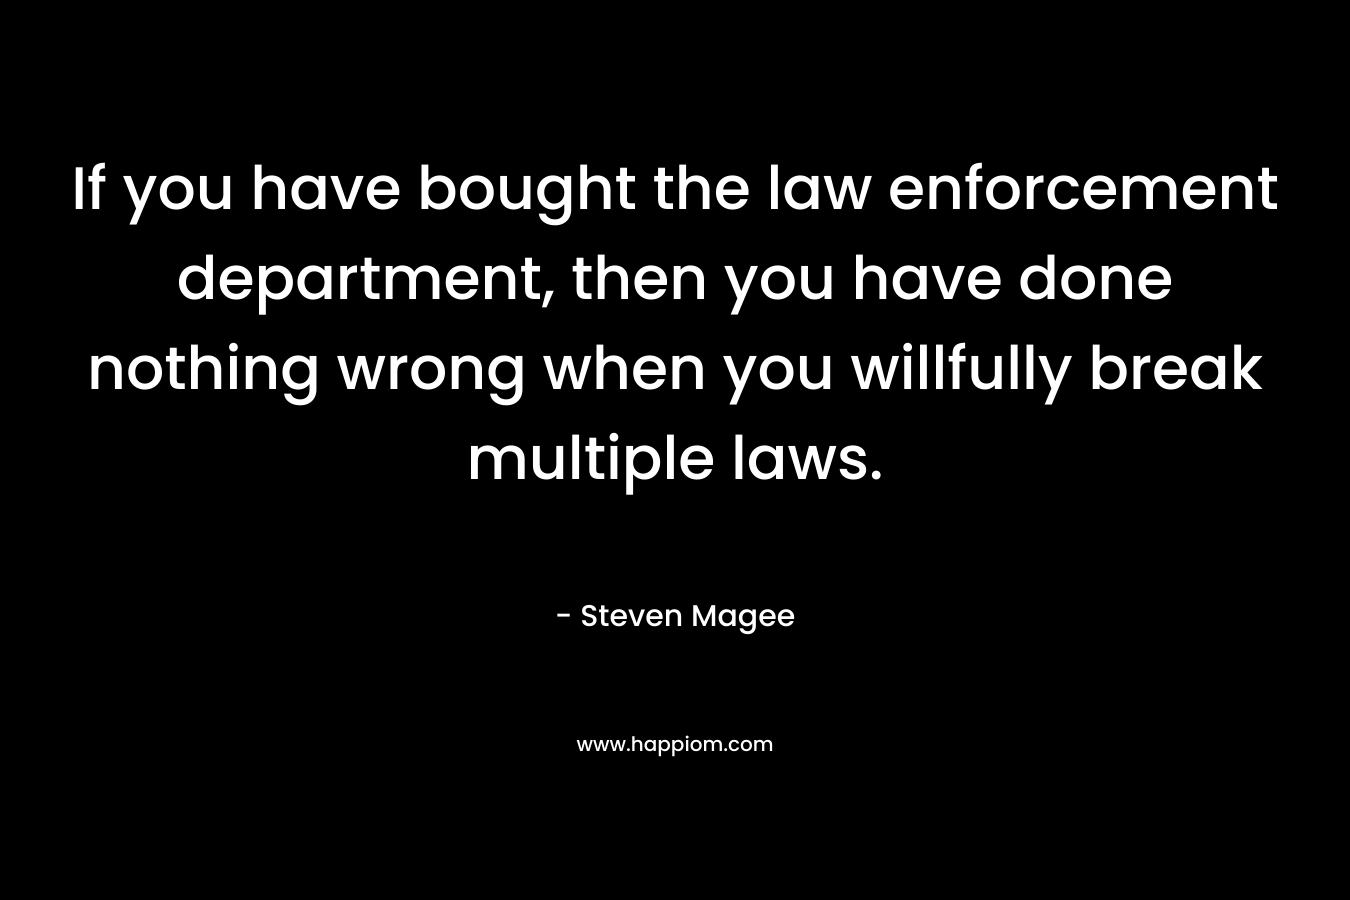 If you have bought the law enforcement department, then you have done nothing wrong when you willfully break multiple laws. – Steven Magee